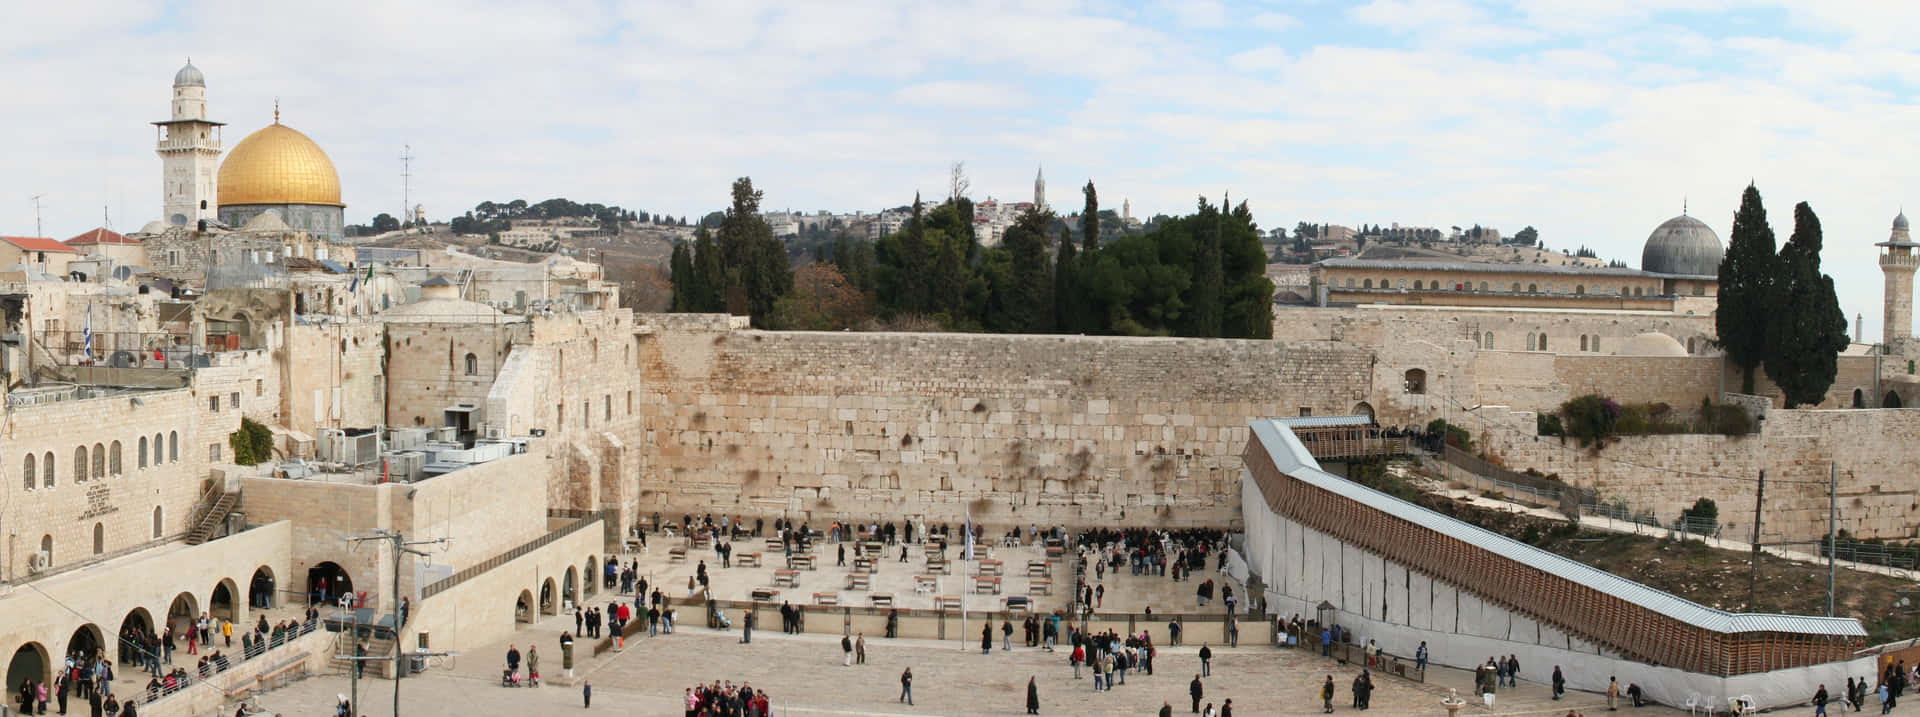 "A Breathtaking View of the Wailing Wall" Wallpaper